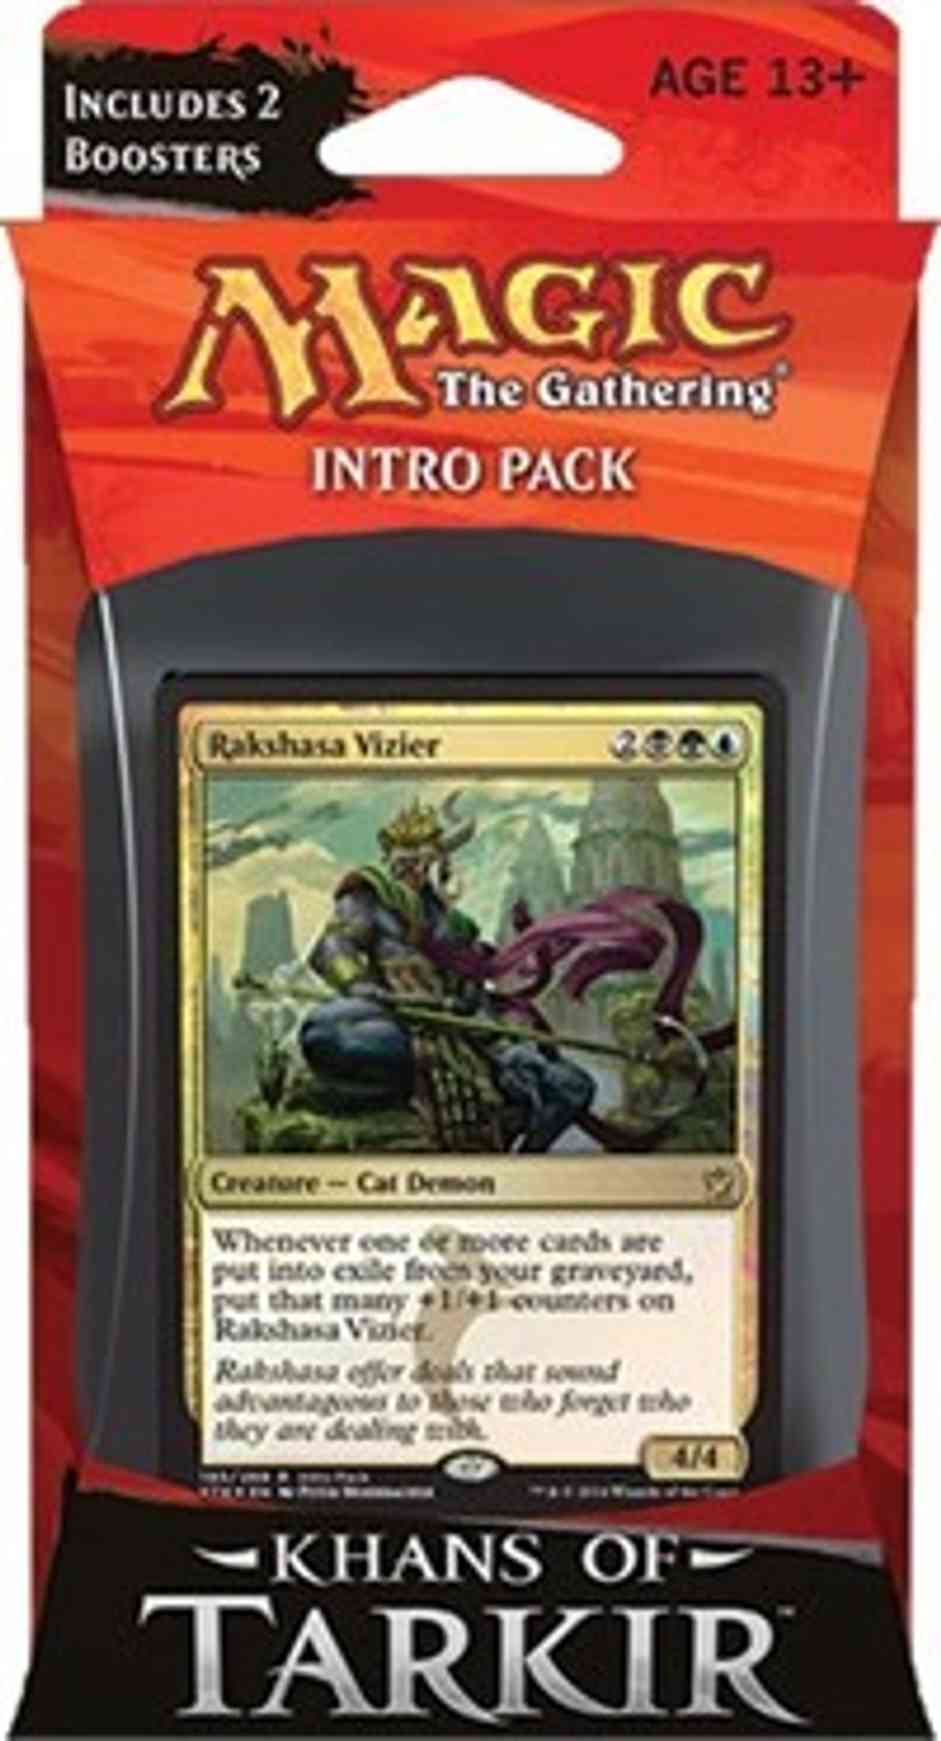 Khans of Tarkir Intro Pack - Sultai magic card front